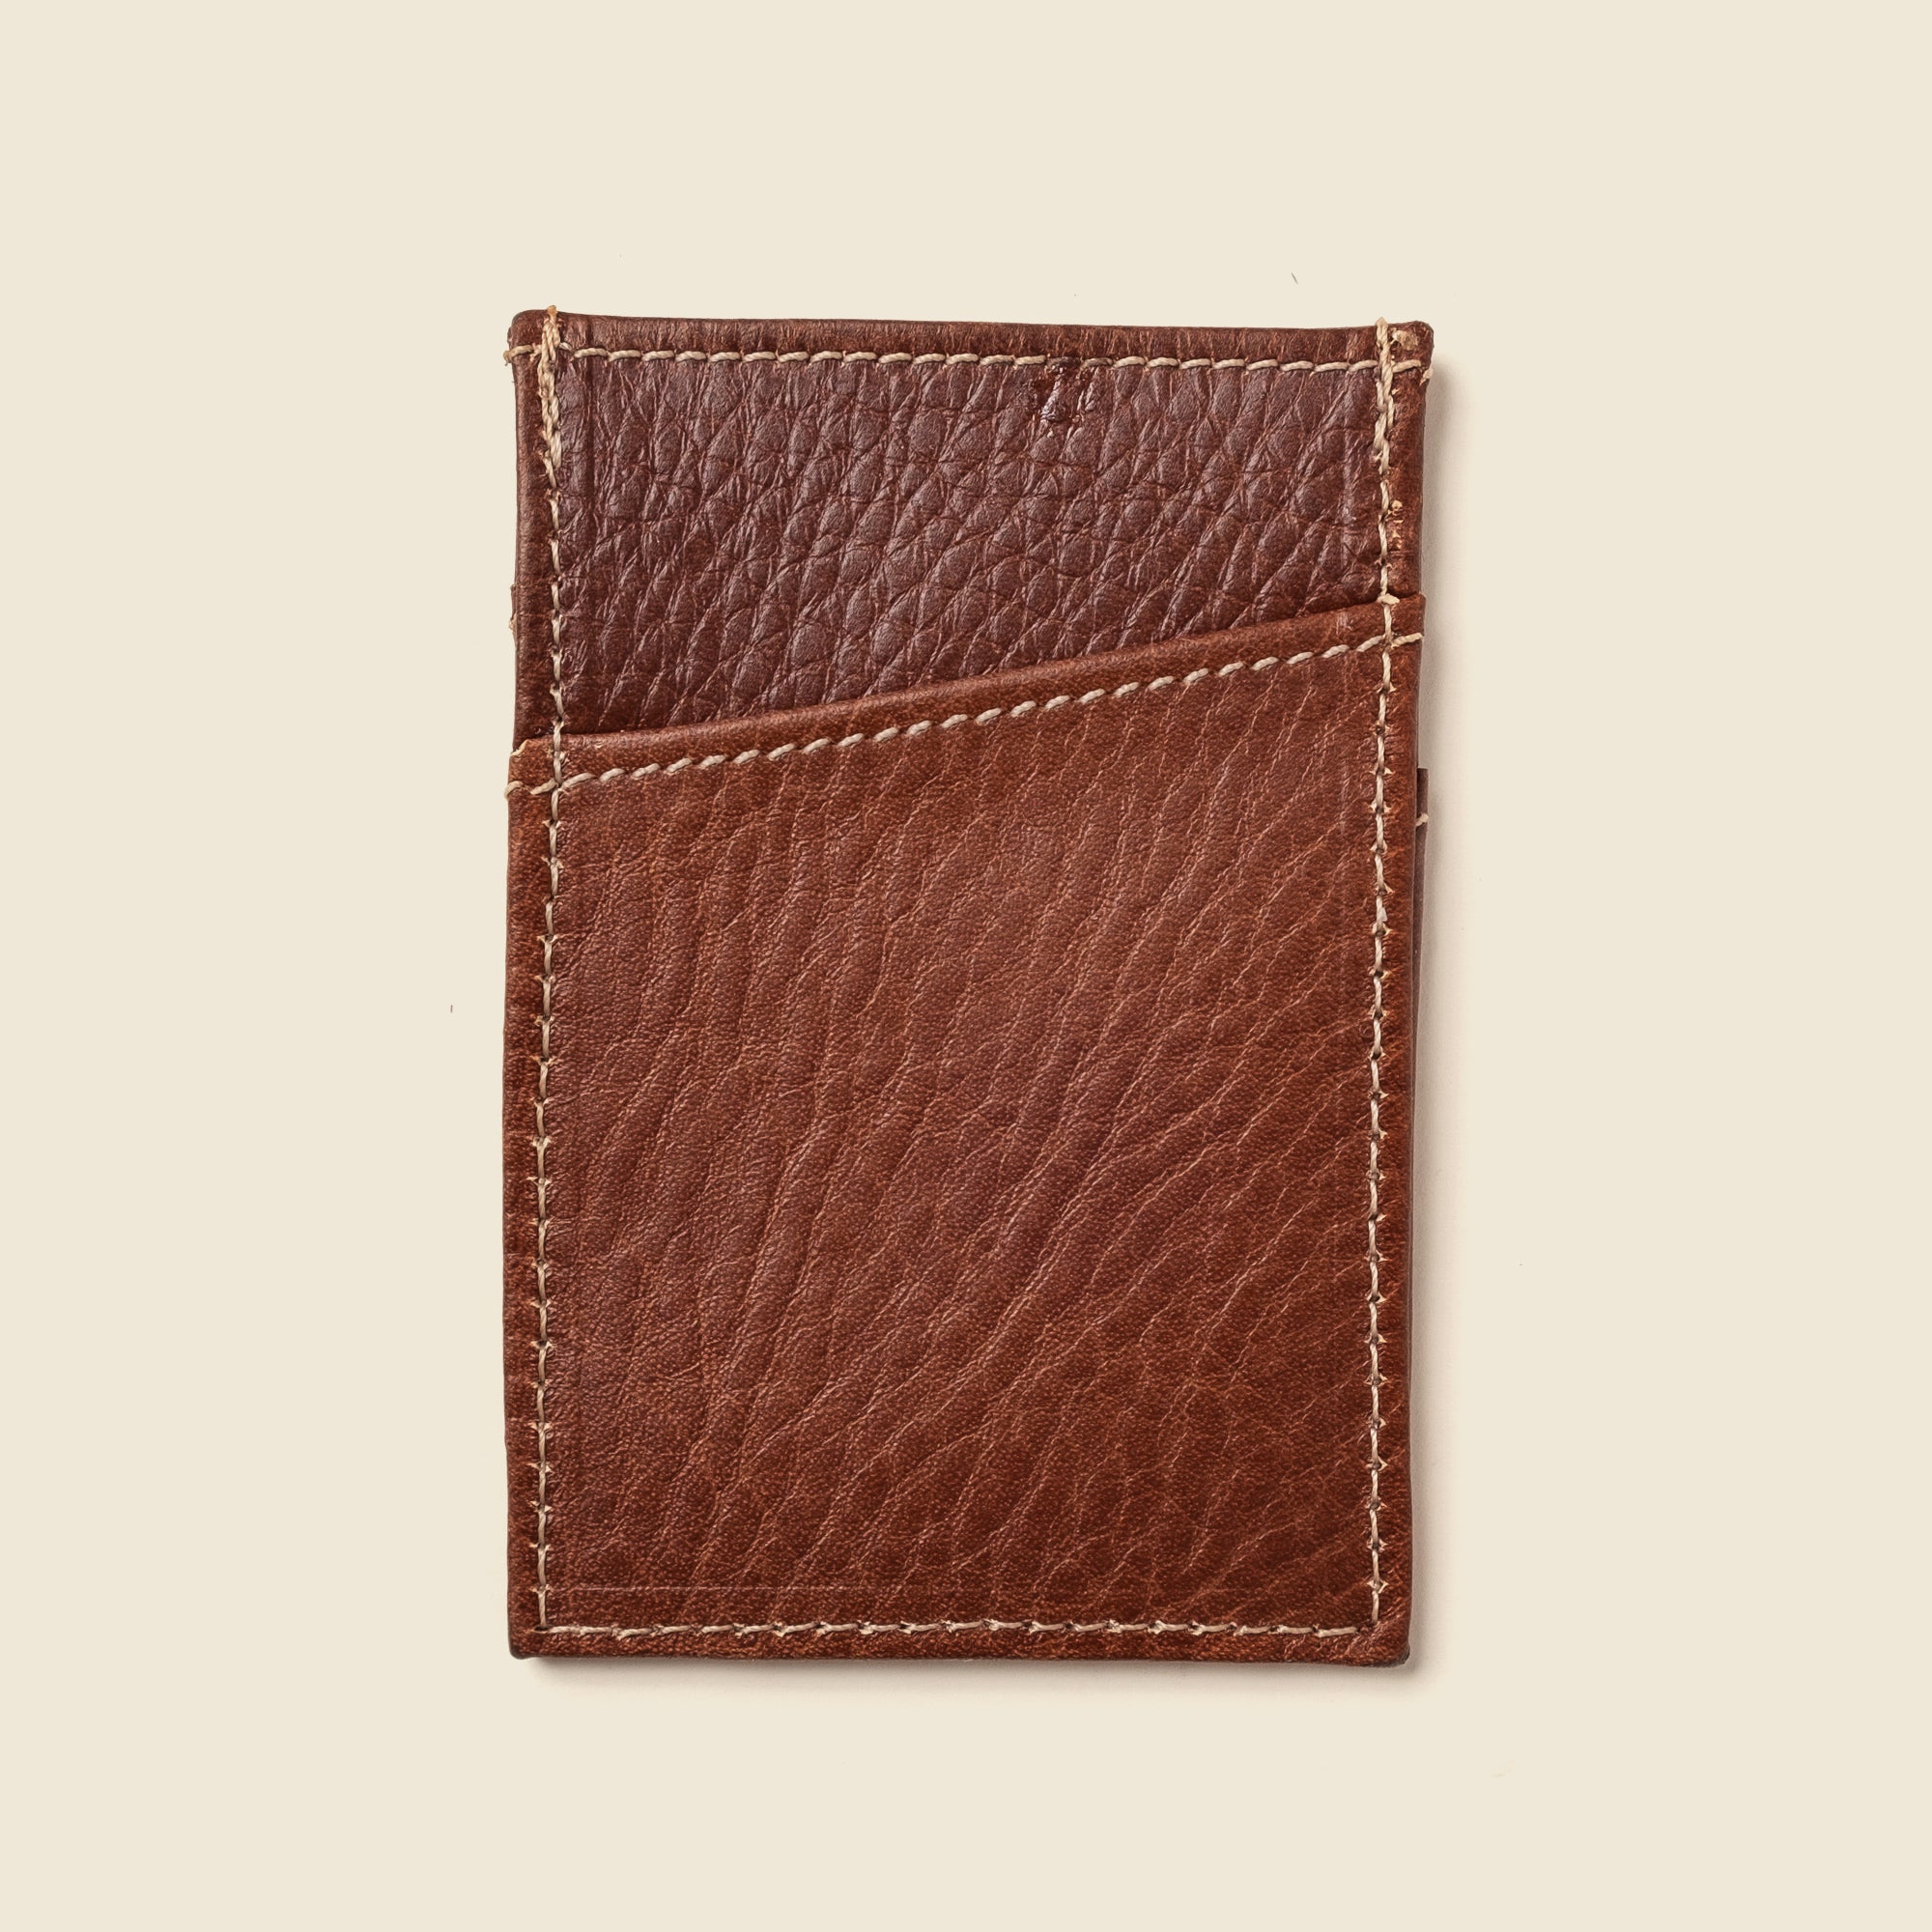 Best father's day gifts for leather lovers